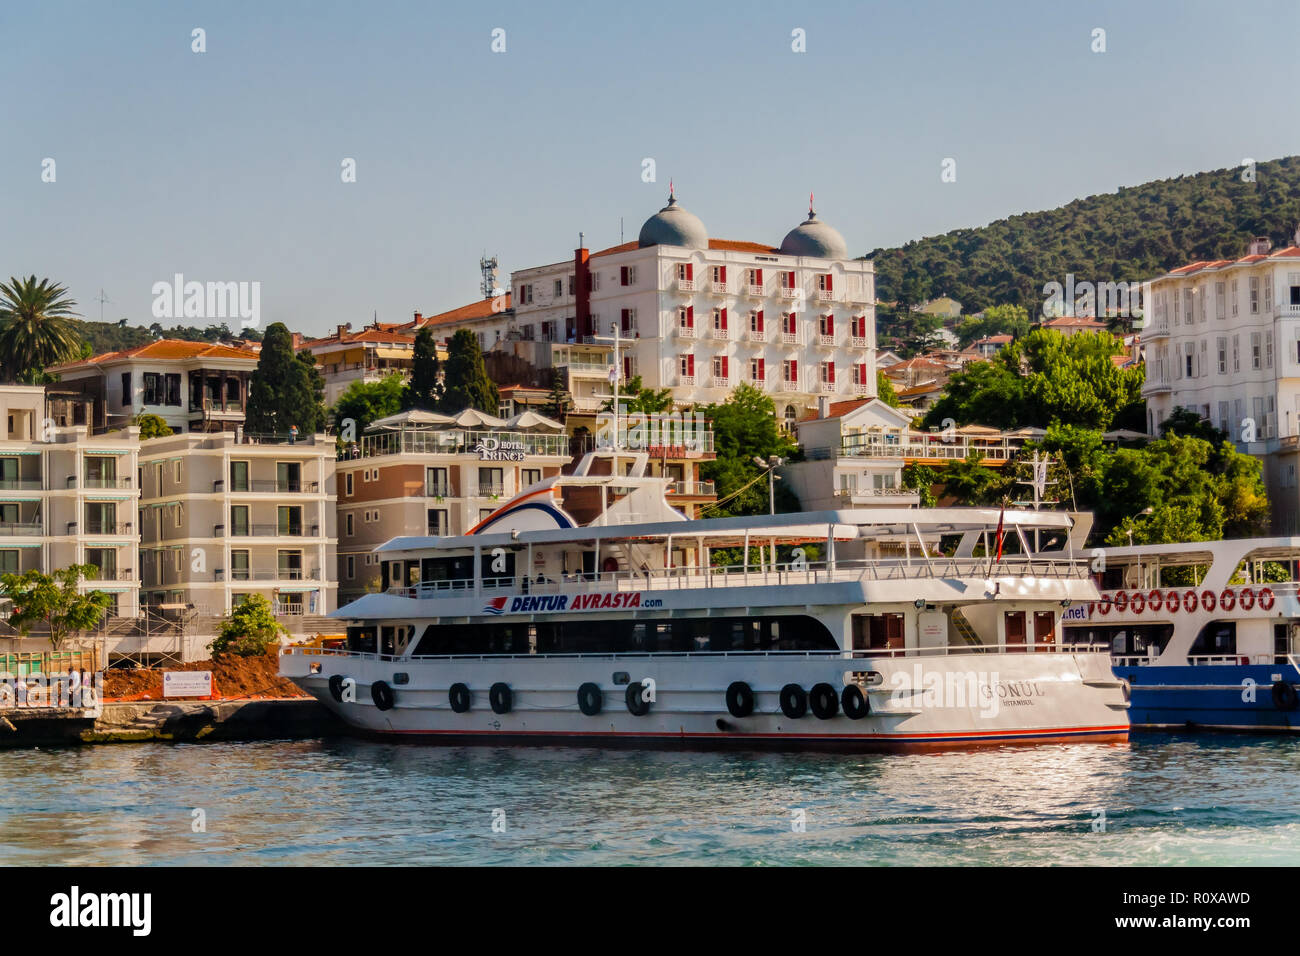 Ferry port on Buyukada, one of the Princes Islands, with the splendid Palas Hotel in the background. Stock Photo